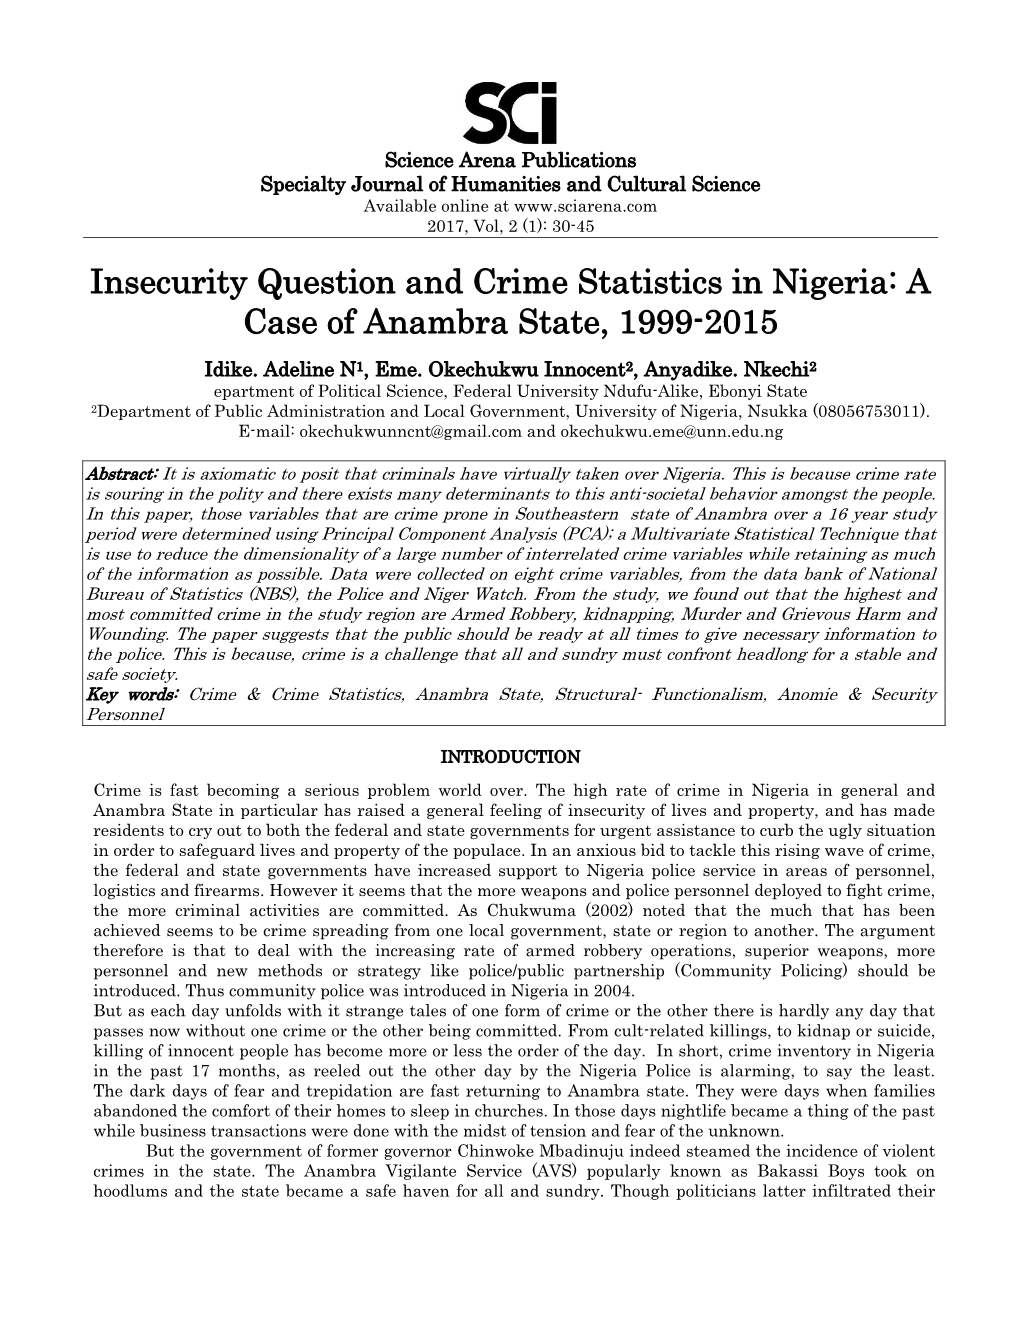 Insecurity Question and Crime Statistics in Nigeria: a Case of Anambra State, 1999-2015